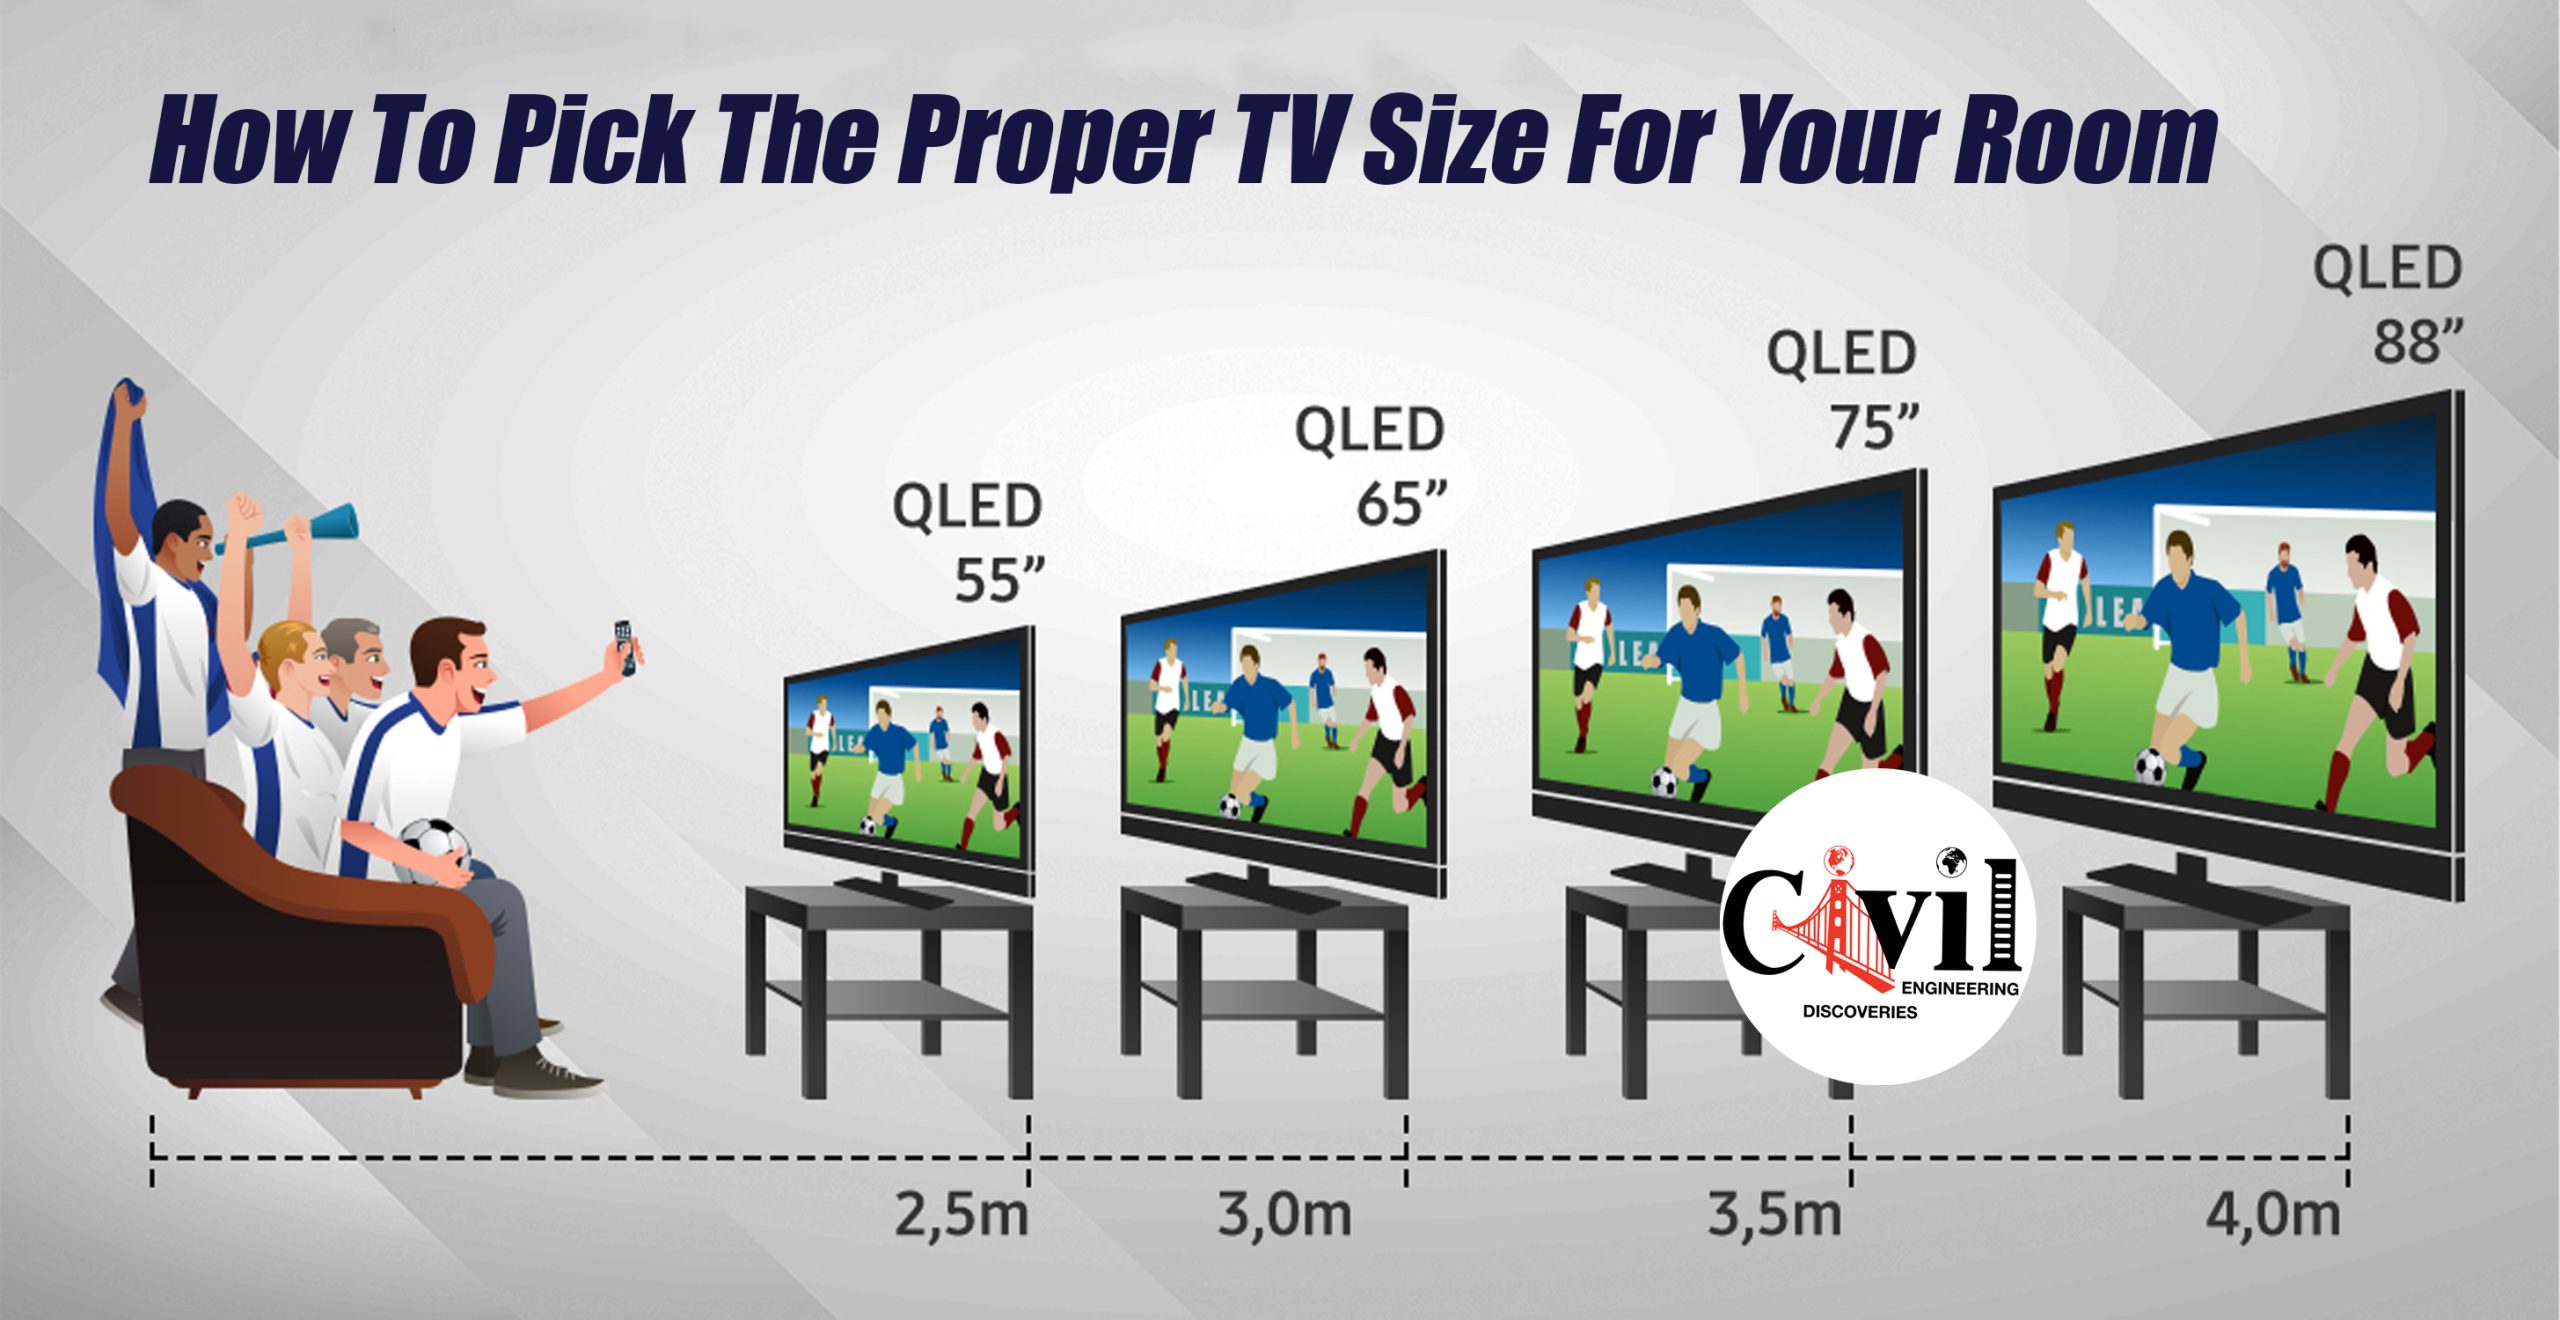 How To Pick The Proper TV Size For Your Room | Engineering Discoveries